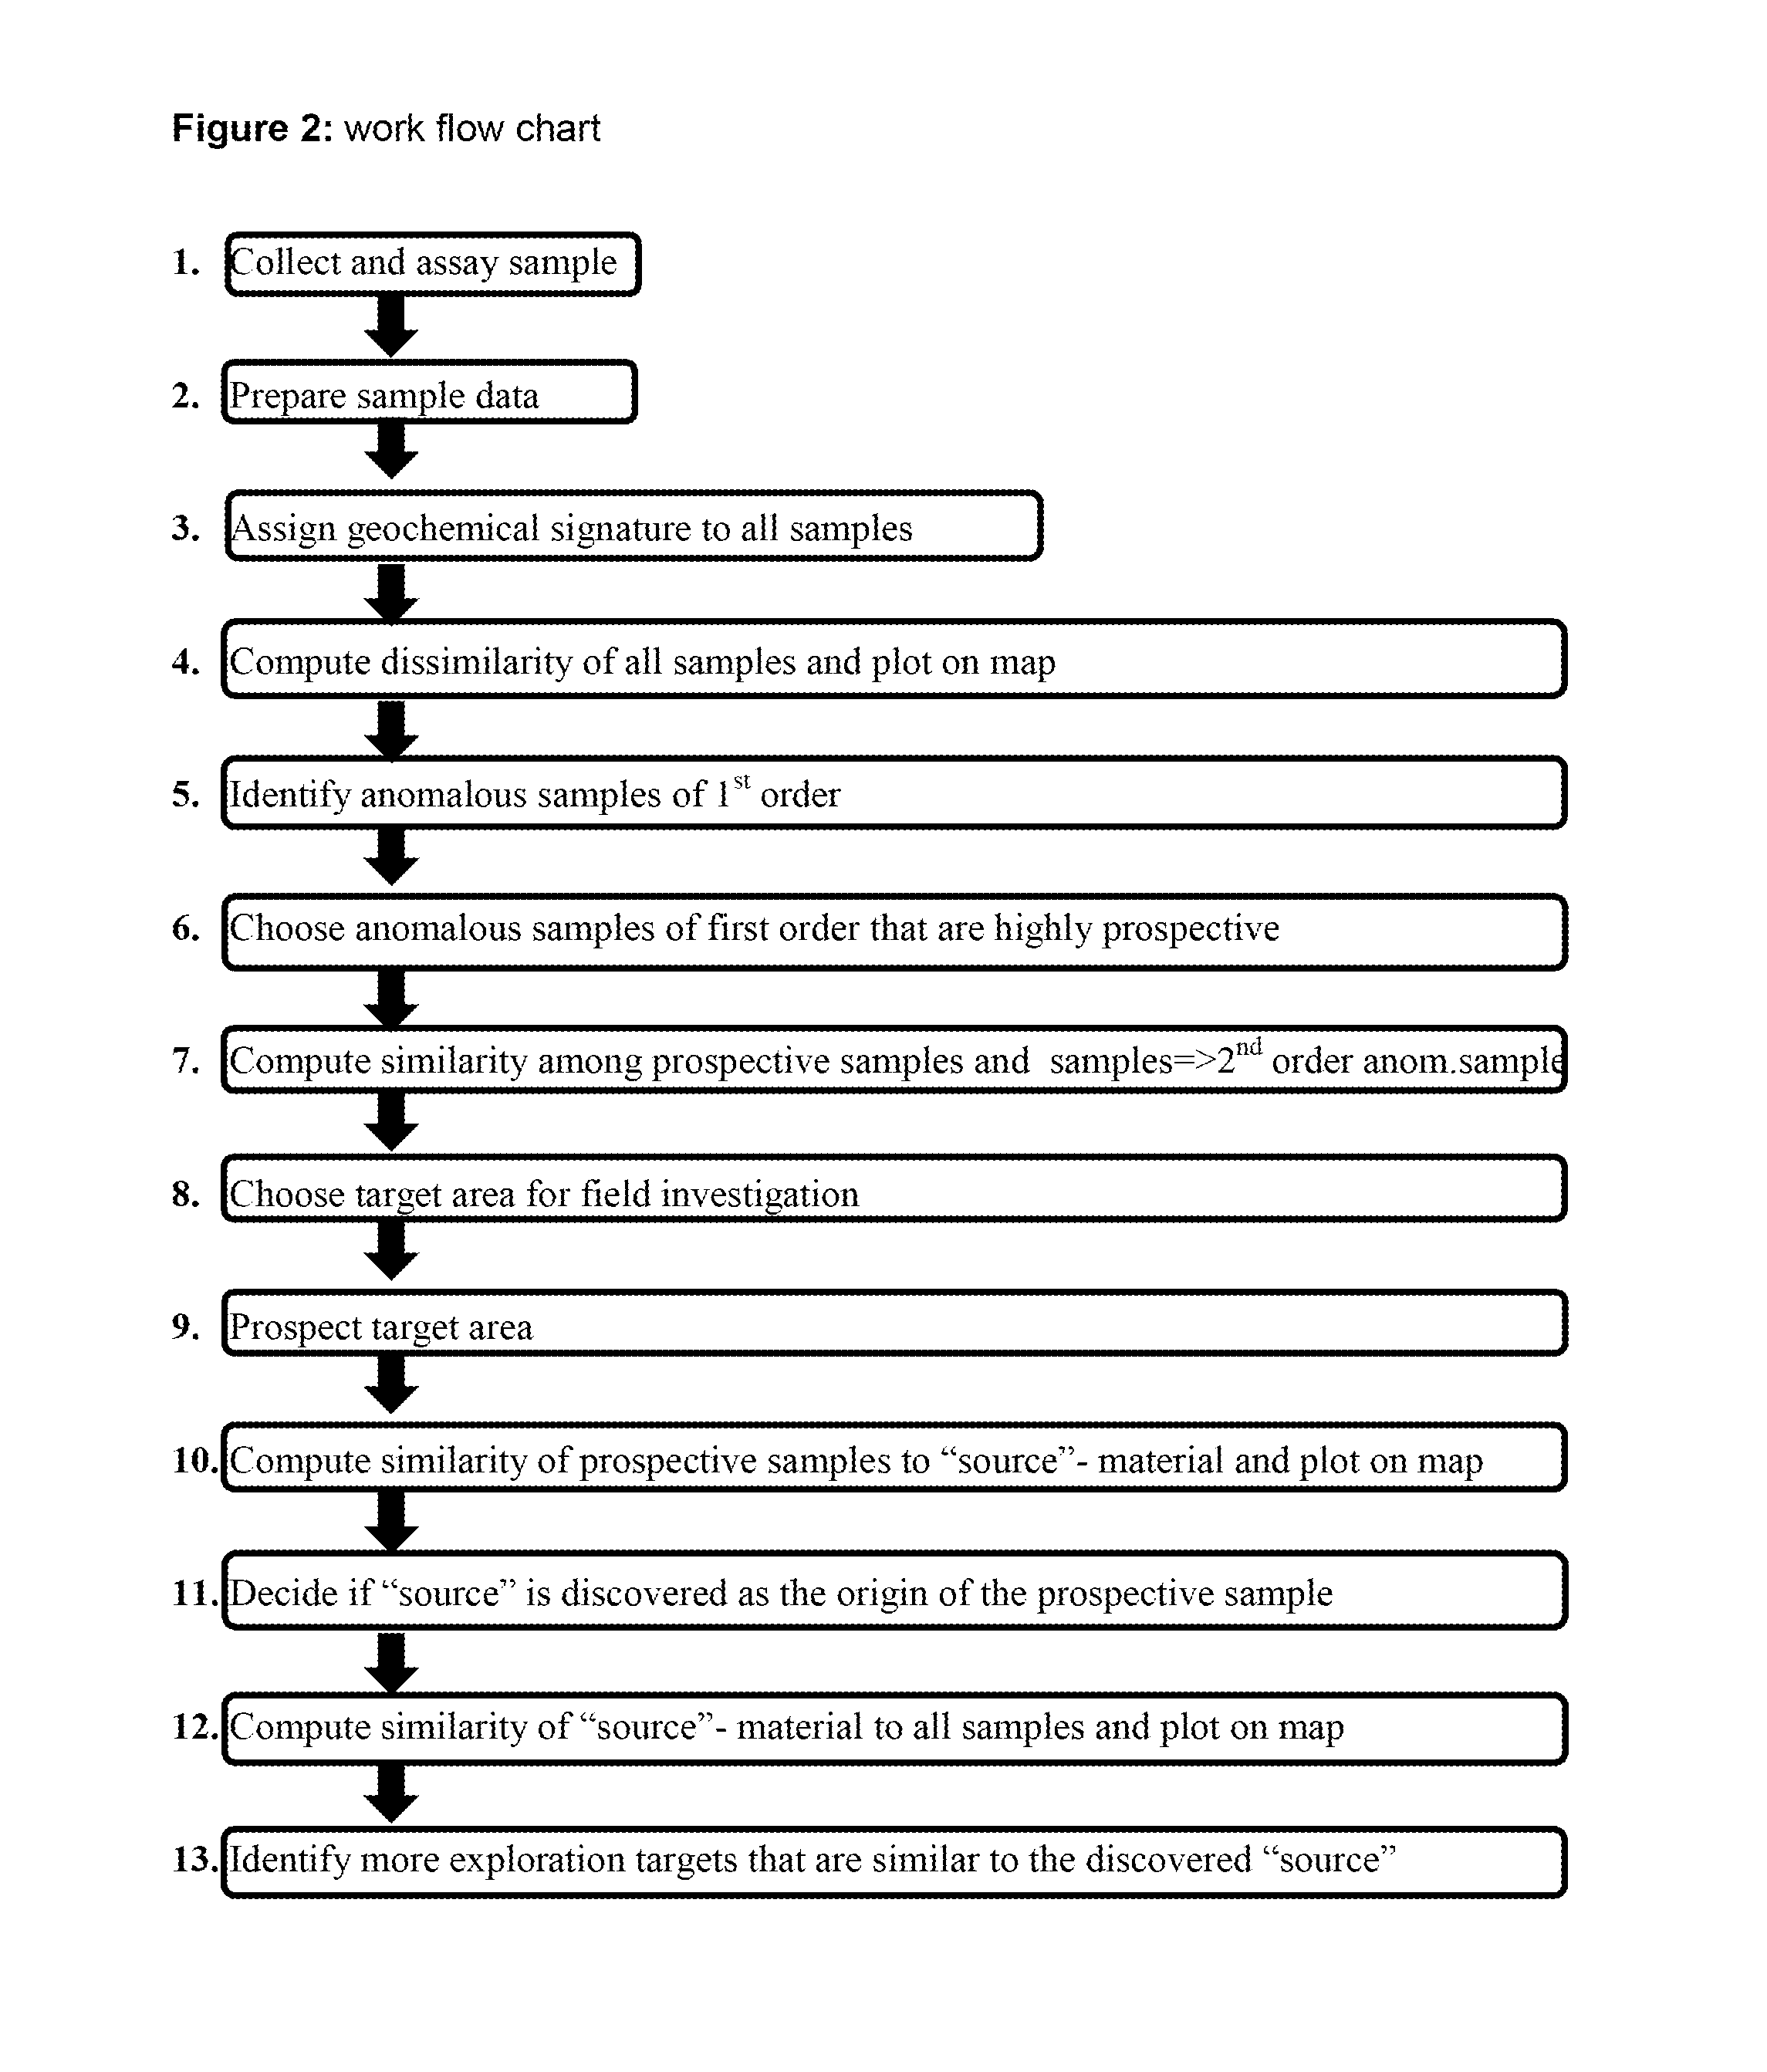 Method to identify multivariate anomalies by computing similarity and dissimilarity between entities and considering their spatial interdependency